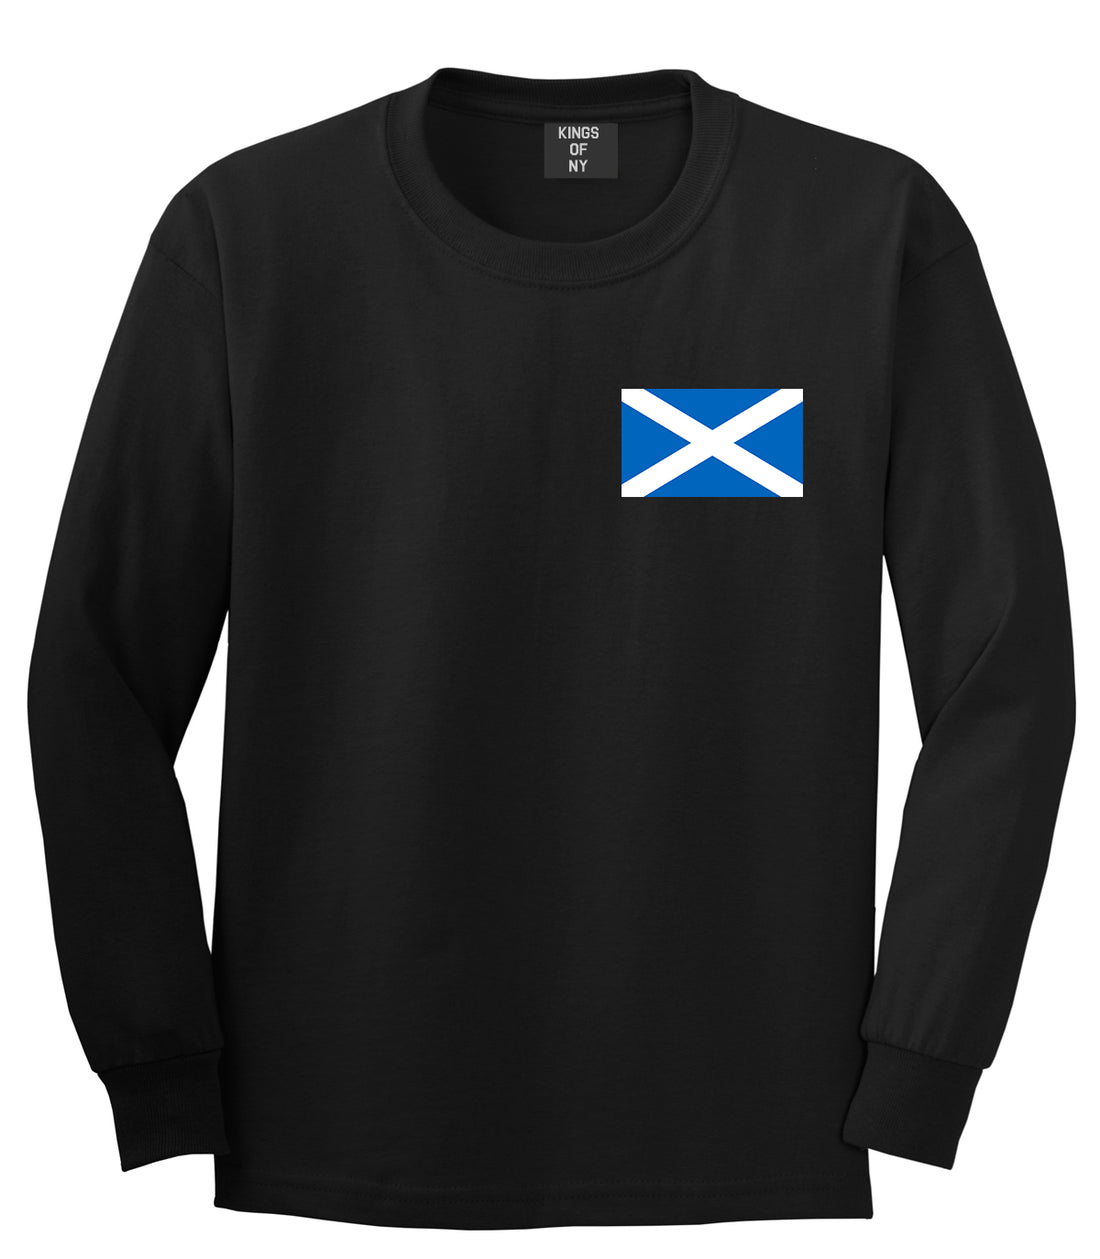 Scotland Flag Country Chest Black Long Sleeve T-Shirt by Kings Of NY